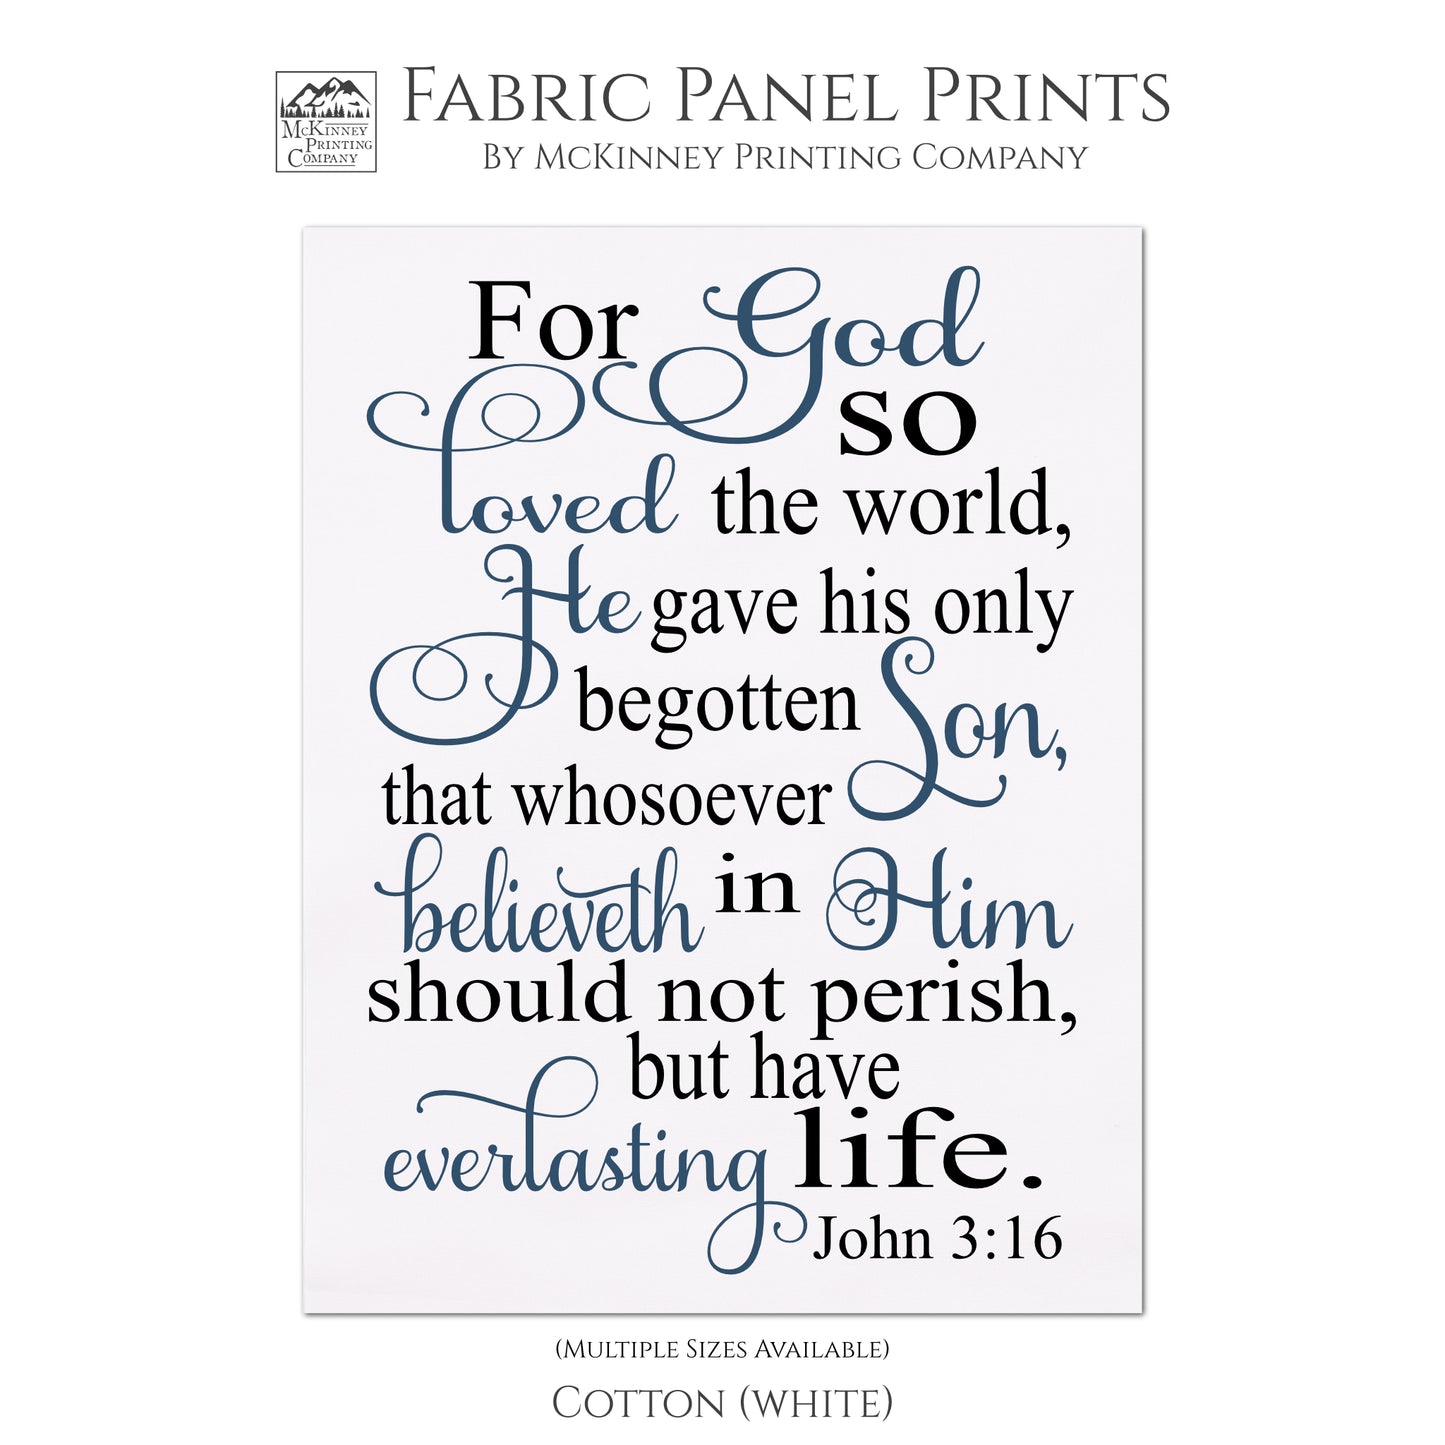 For God so loved the world, He gave his only begotten Son, that whosoever believeth in Him should not perish, but have everlasting life. John 3:16, Fabric Panel Print, Wall Hanging, Quilt Block - Cotton, White